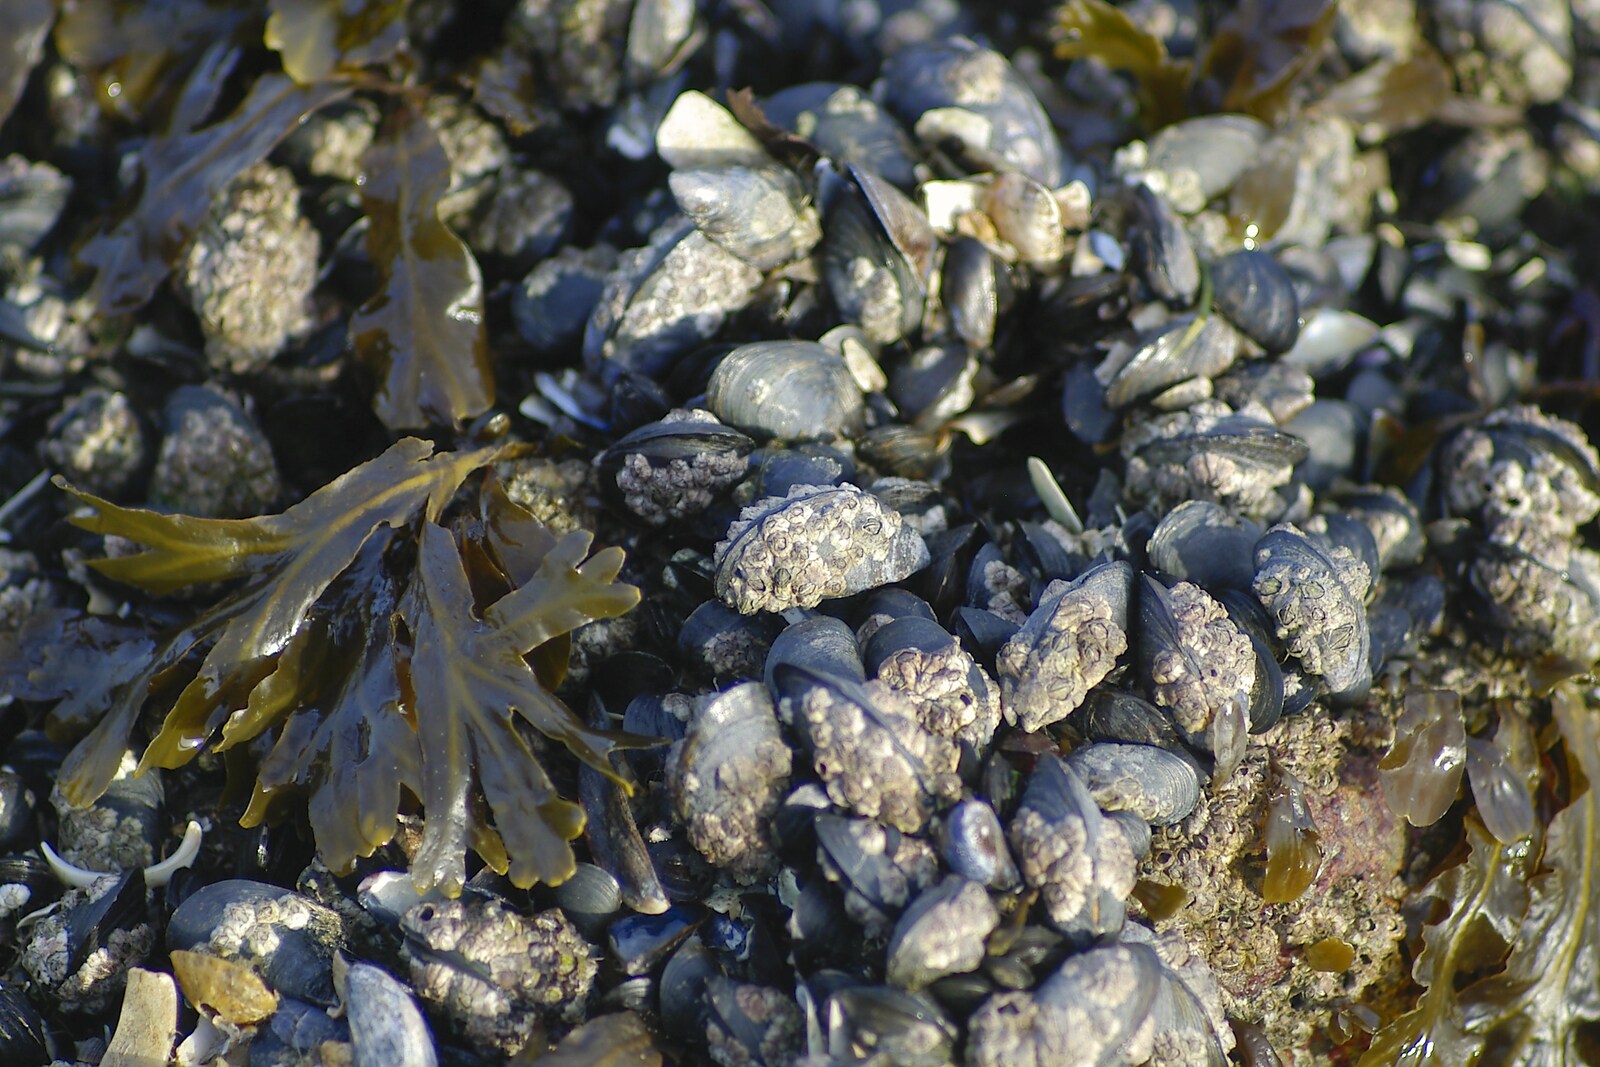 Barnacles on mussels from Blackrock Mornings, Dublin County, Ireland - 29th October 2006